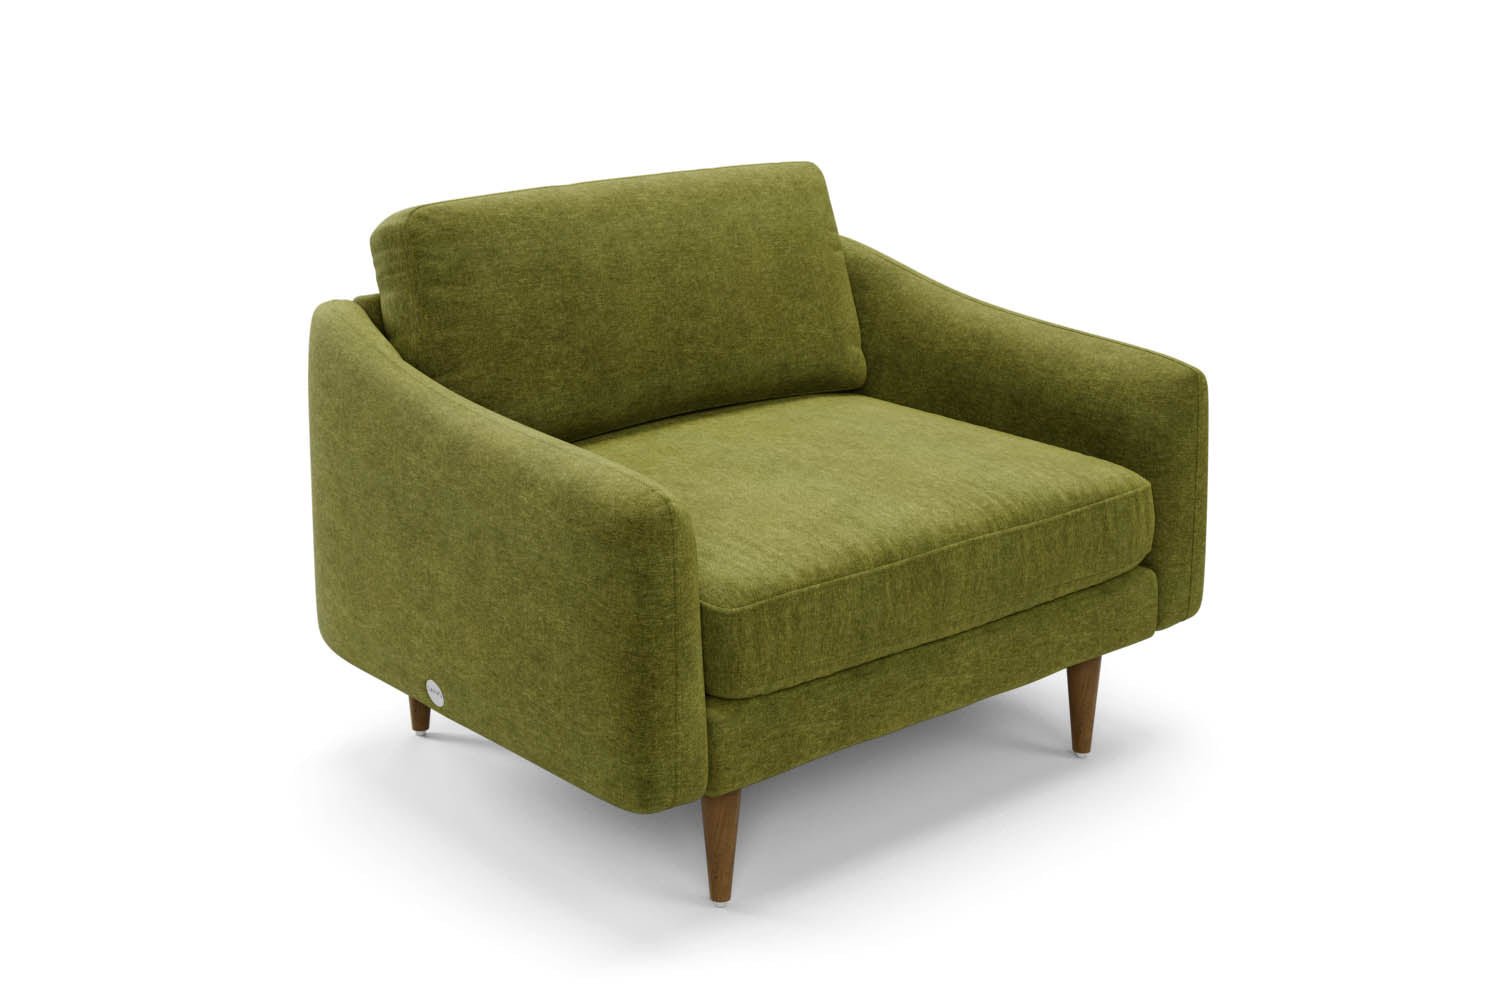 The Rebel Snuggler Sofa in Moss with brown legs